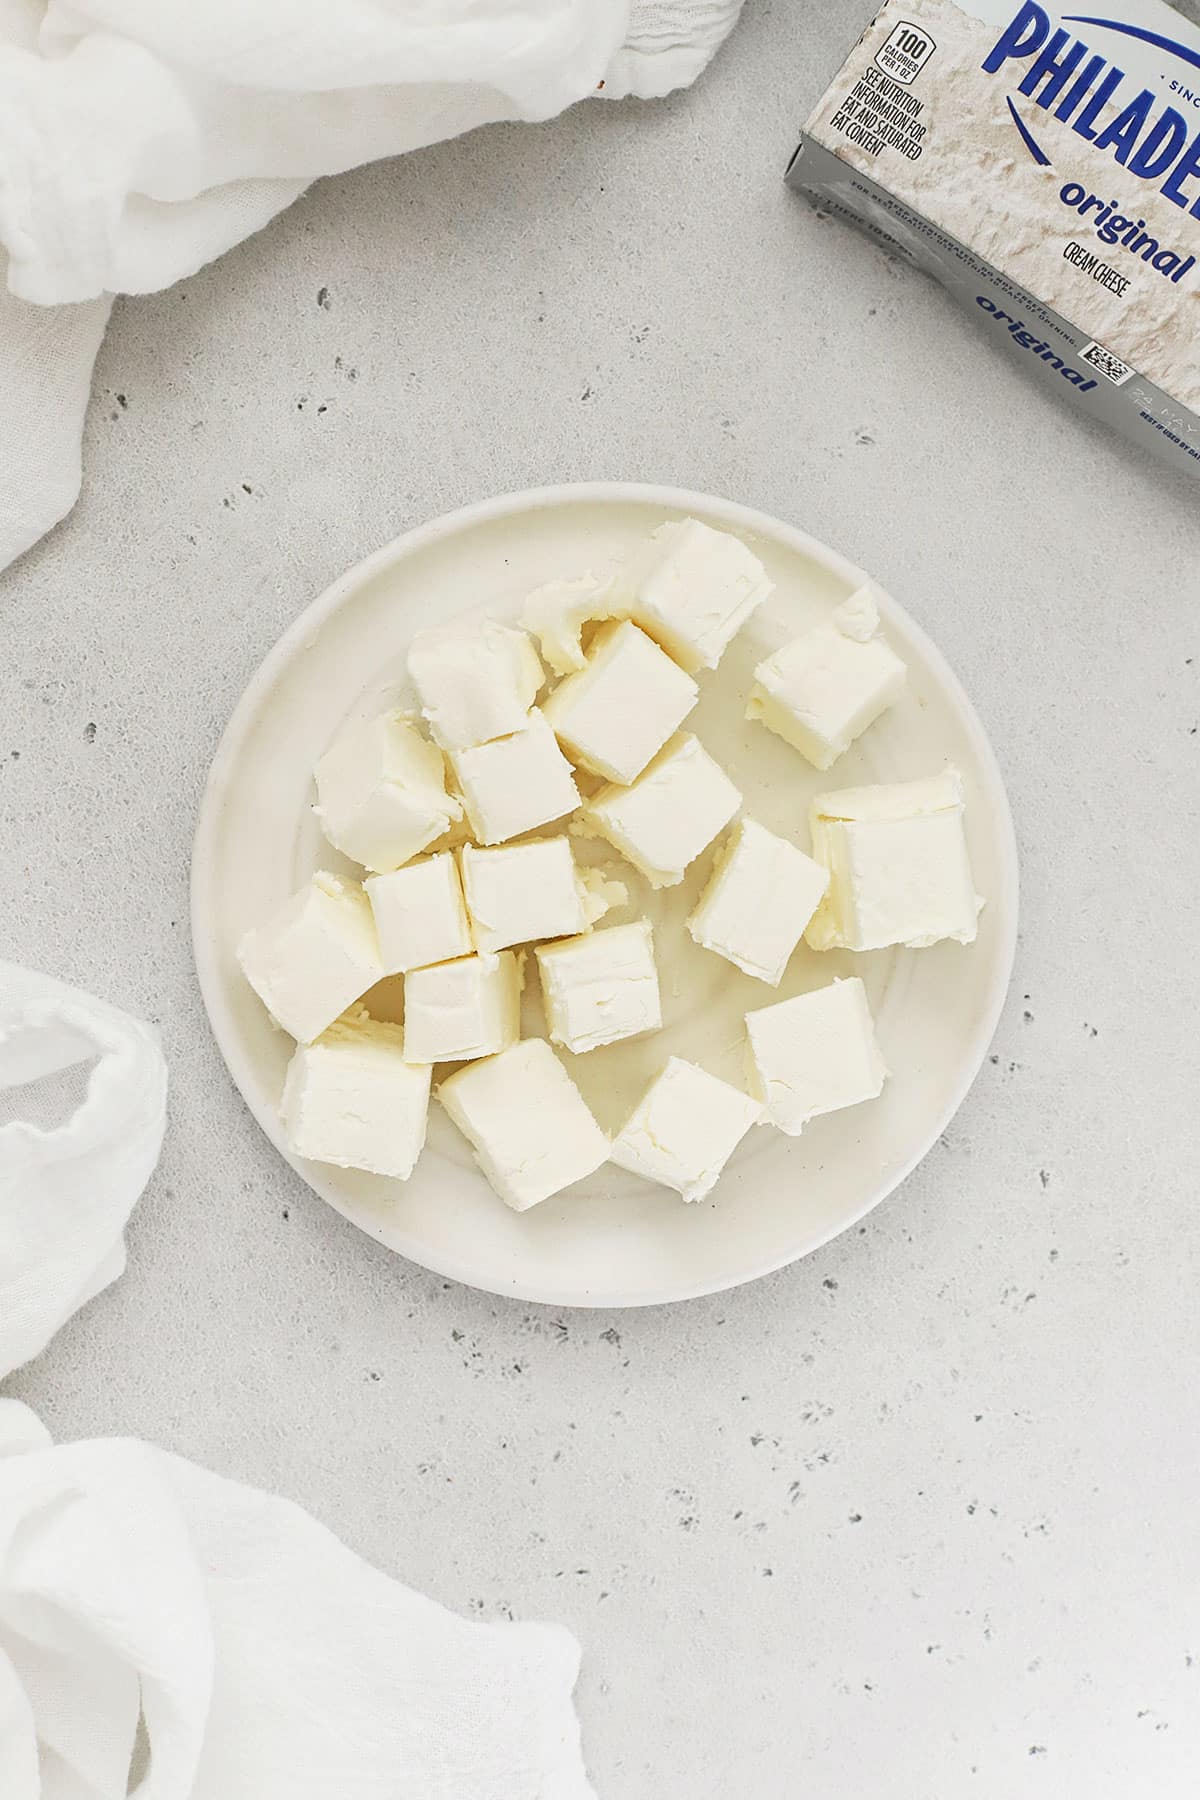 a block of cream cheese cut into small cubes on a white plate